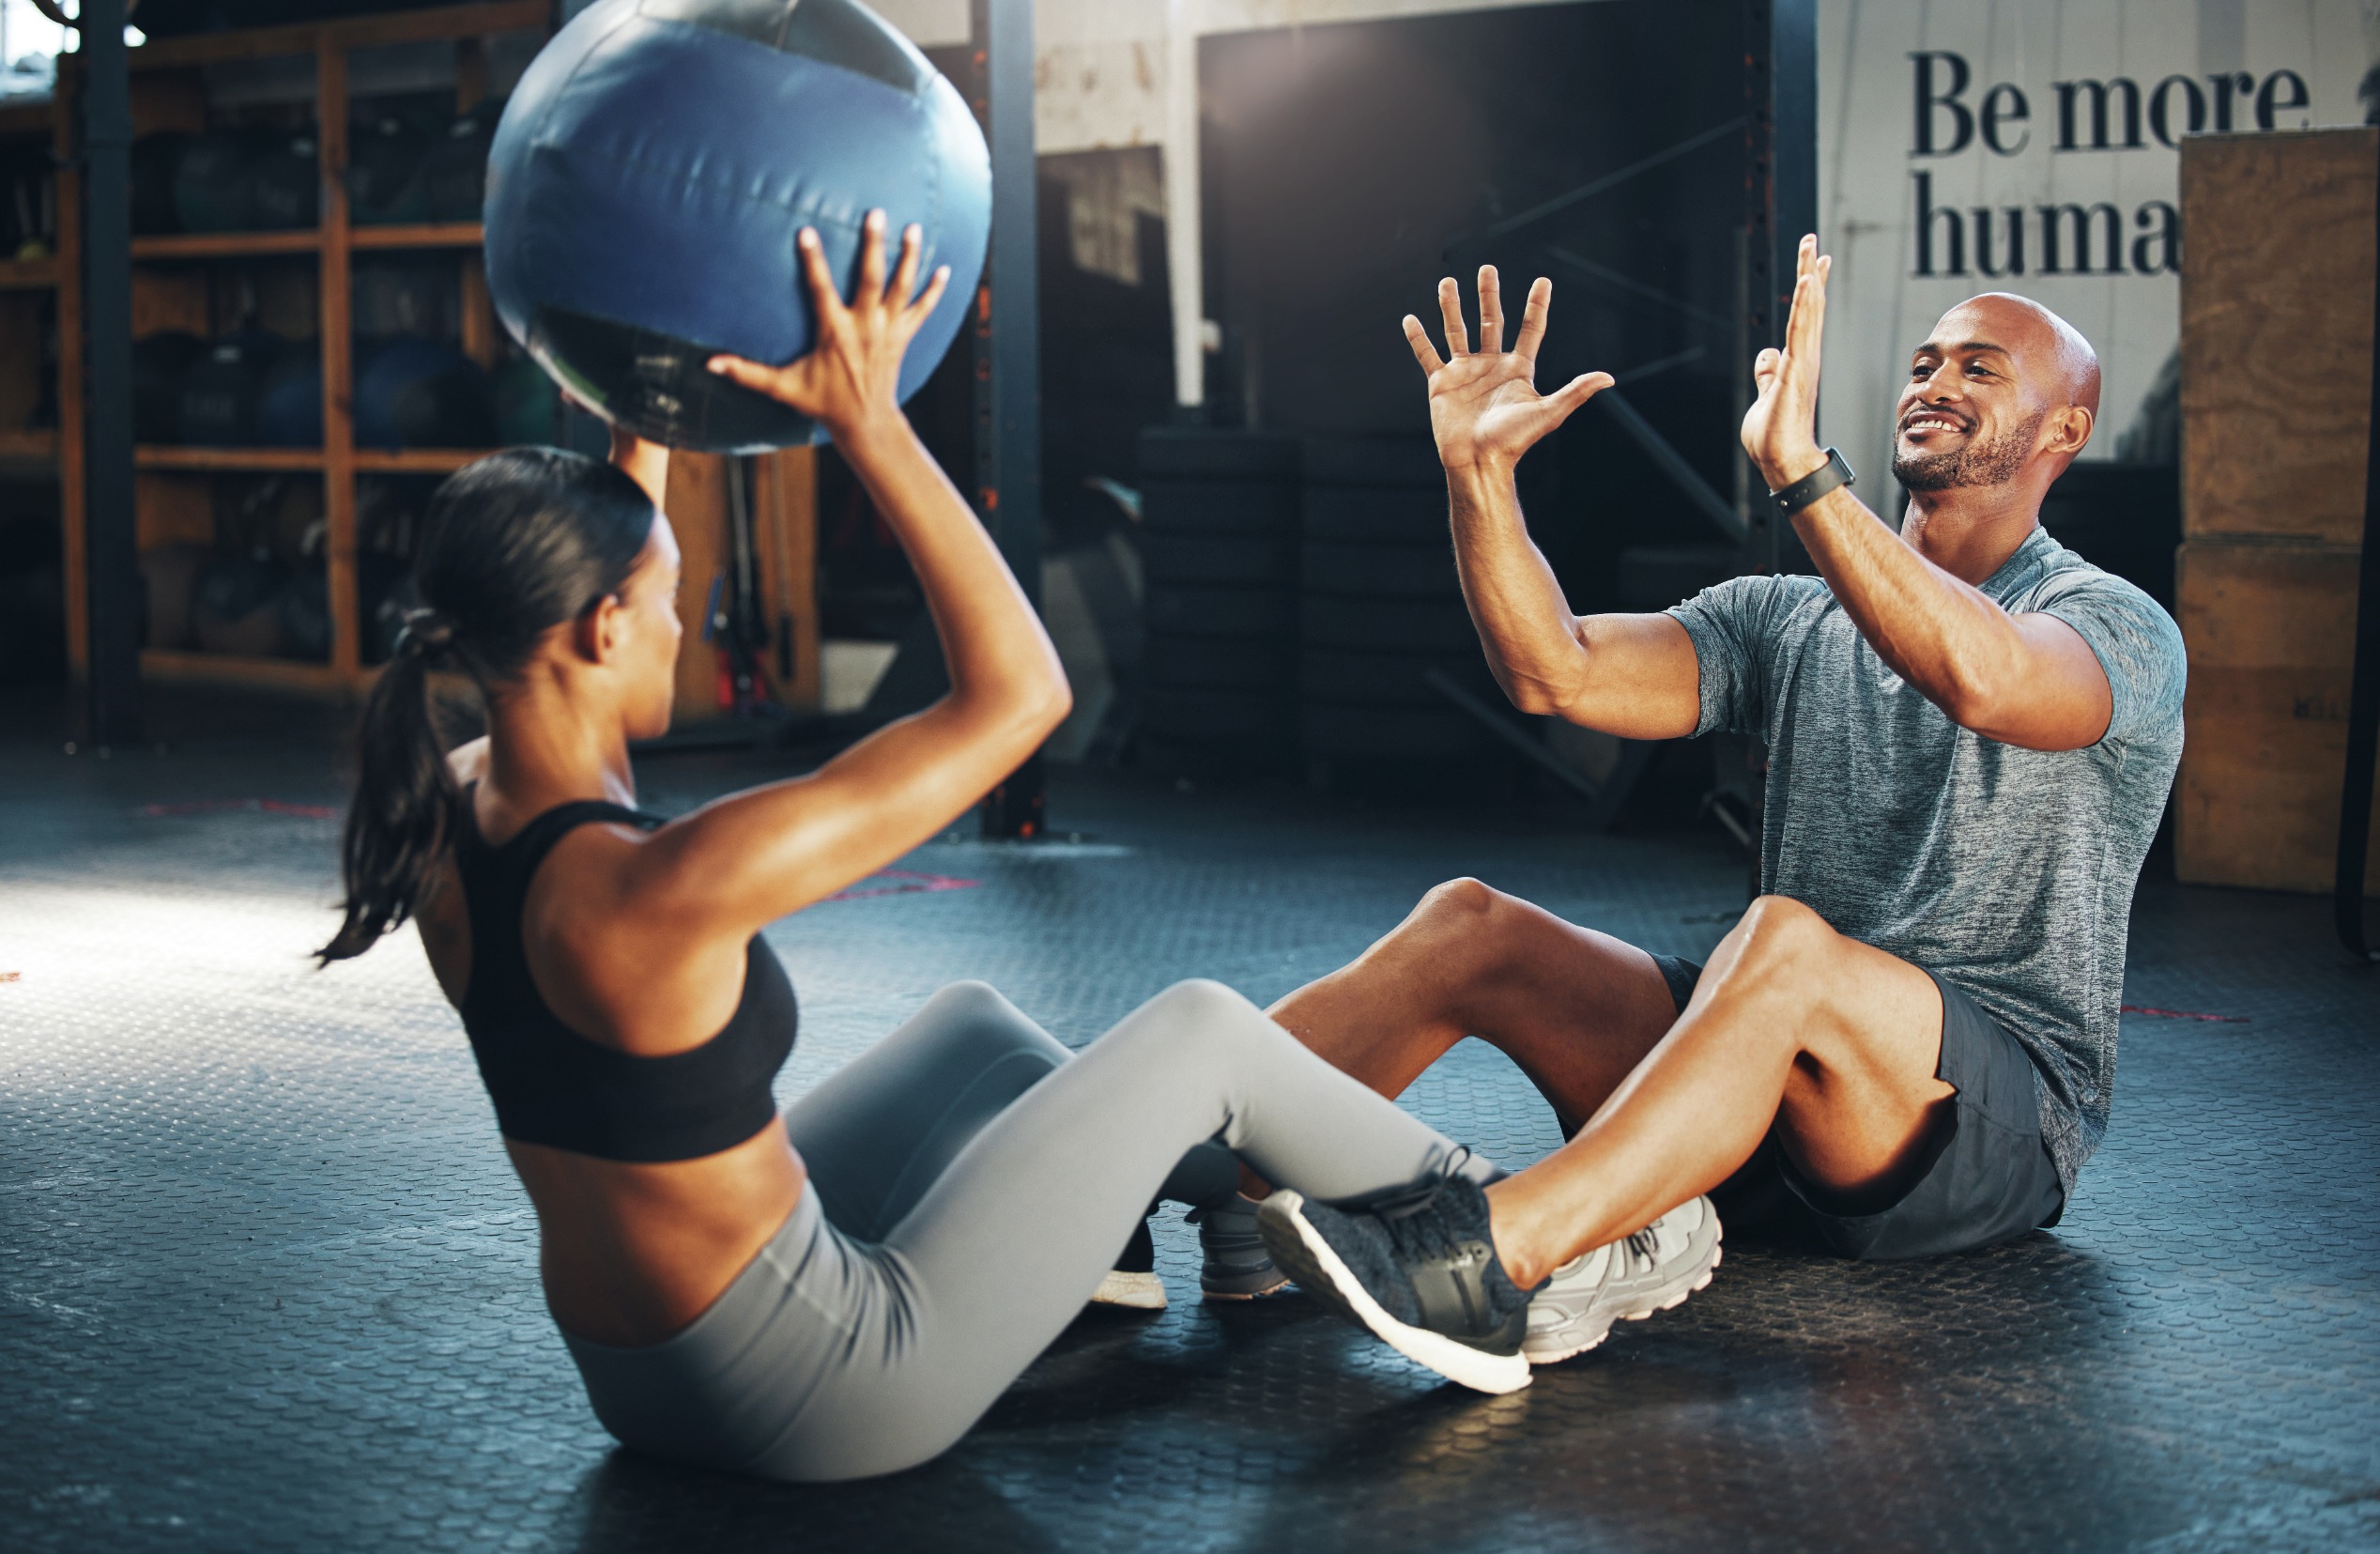 Man and woman passing a medicine ball back and forth during partner workouts.